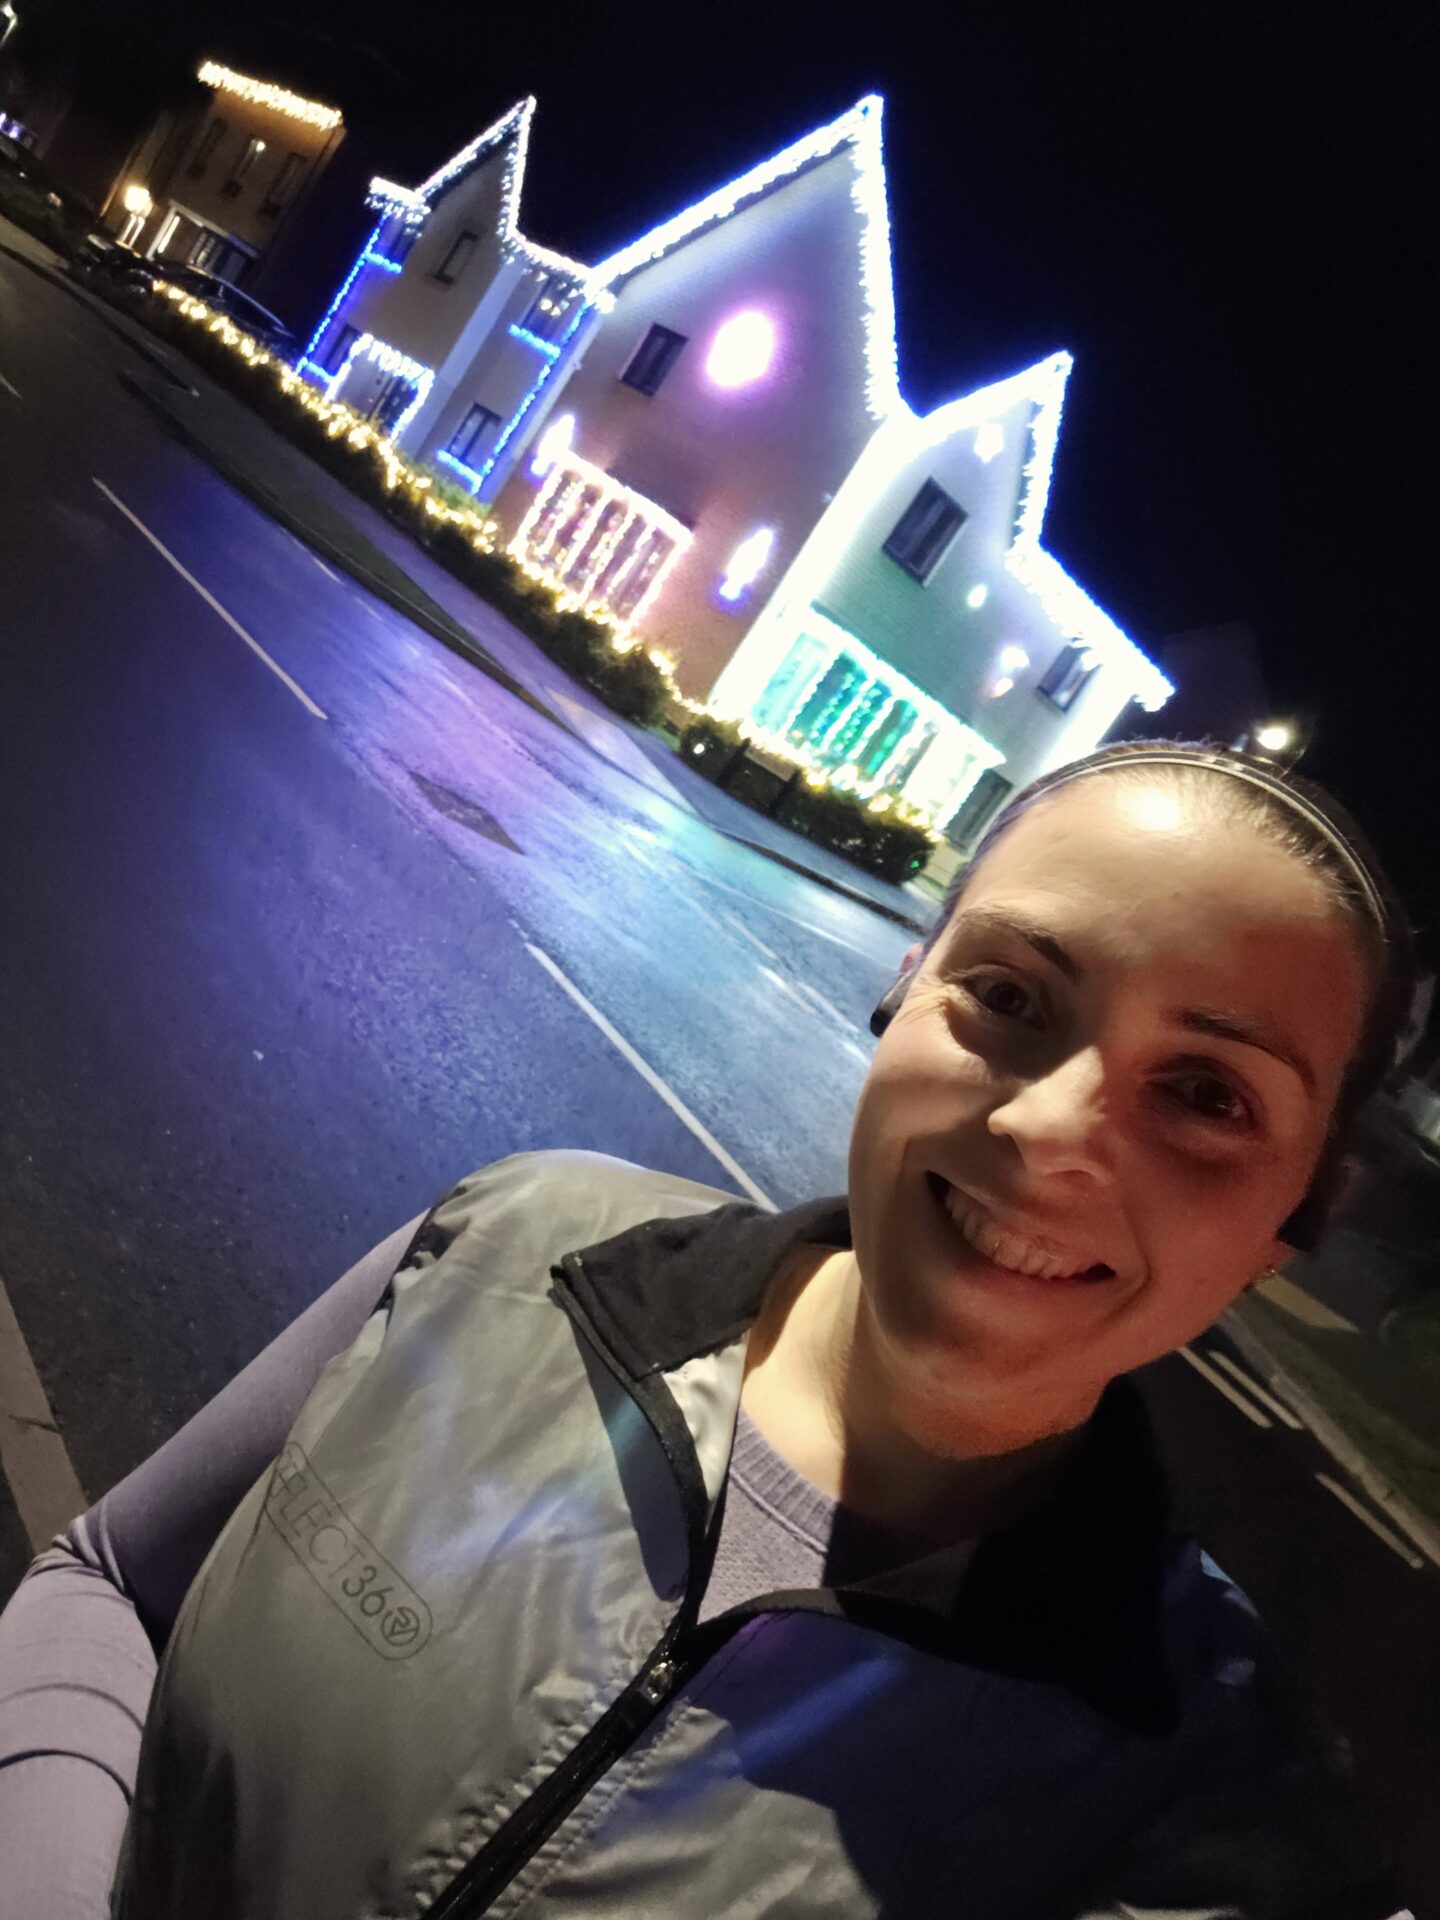 Selfie of a woman in running kit with a house lit up by colour Christmas lights behind her.